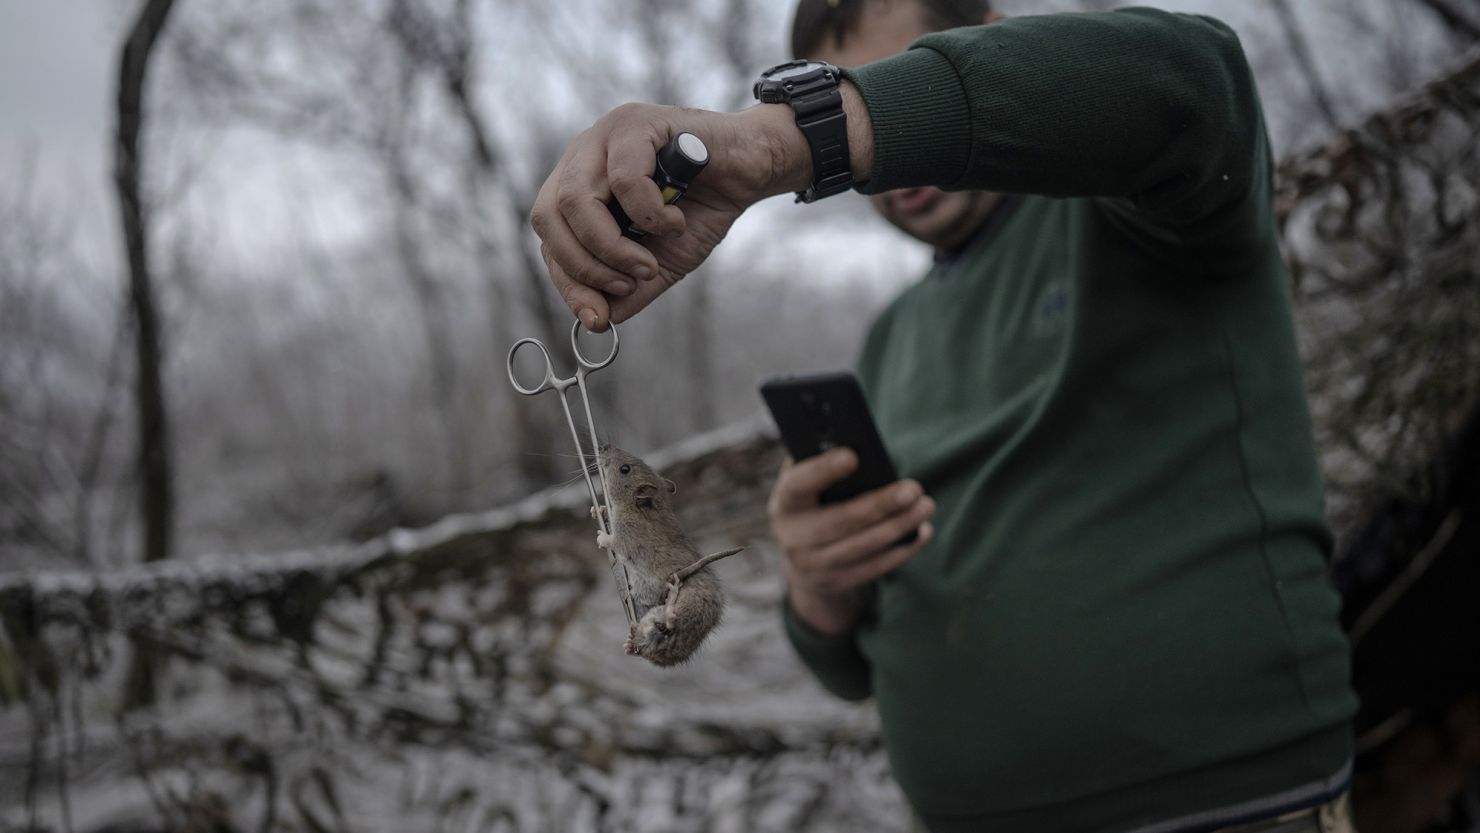 DONETSK REGION, UKRAINE - DECEMBER 16: A military health worker is seen holding a mouse with scissors in front of the trench as Ukrainian soldiers injured in the clashes continue to be evacuated from the frontline amid the ongoing Russia-Ukraine war in Donetsk Region, Ukraine on December 16, 2023. Intense military activity continues in the region. (Photo by Ozge Elif Kizil/Anadolu via Getty Images)